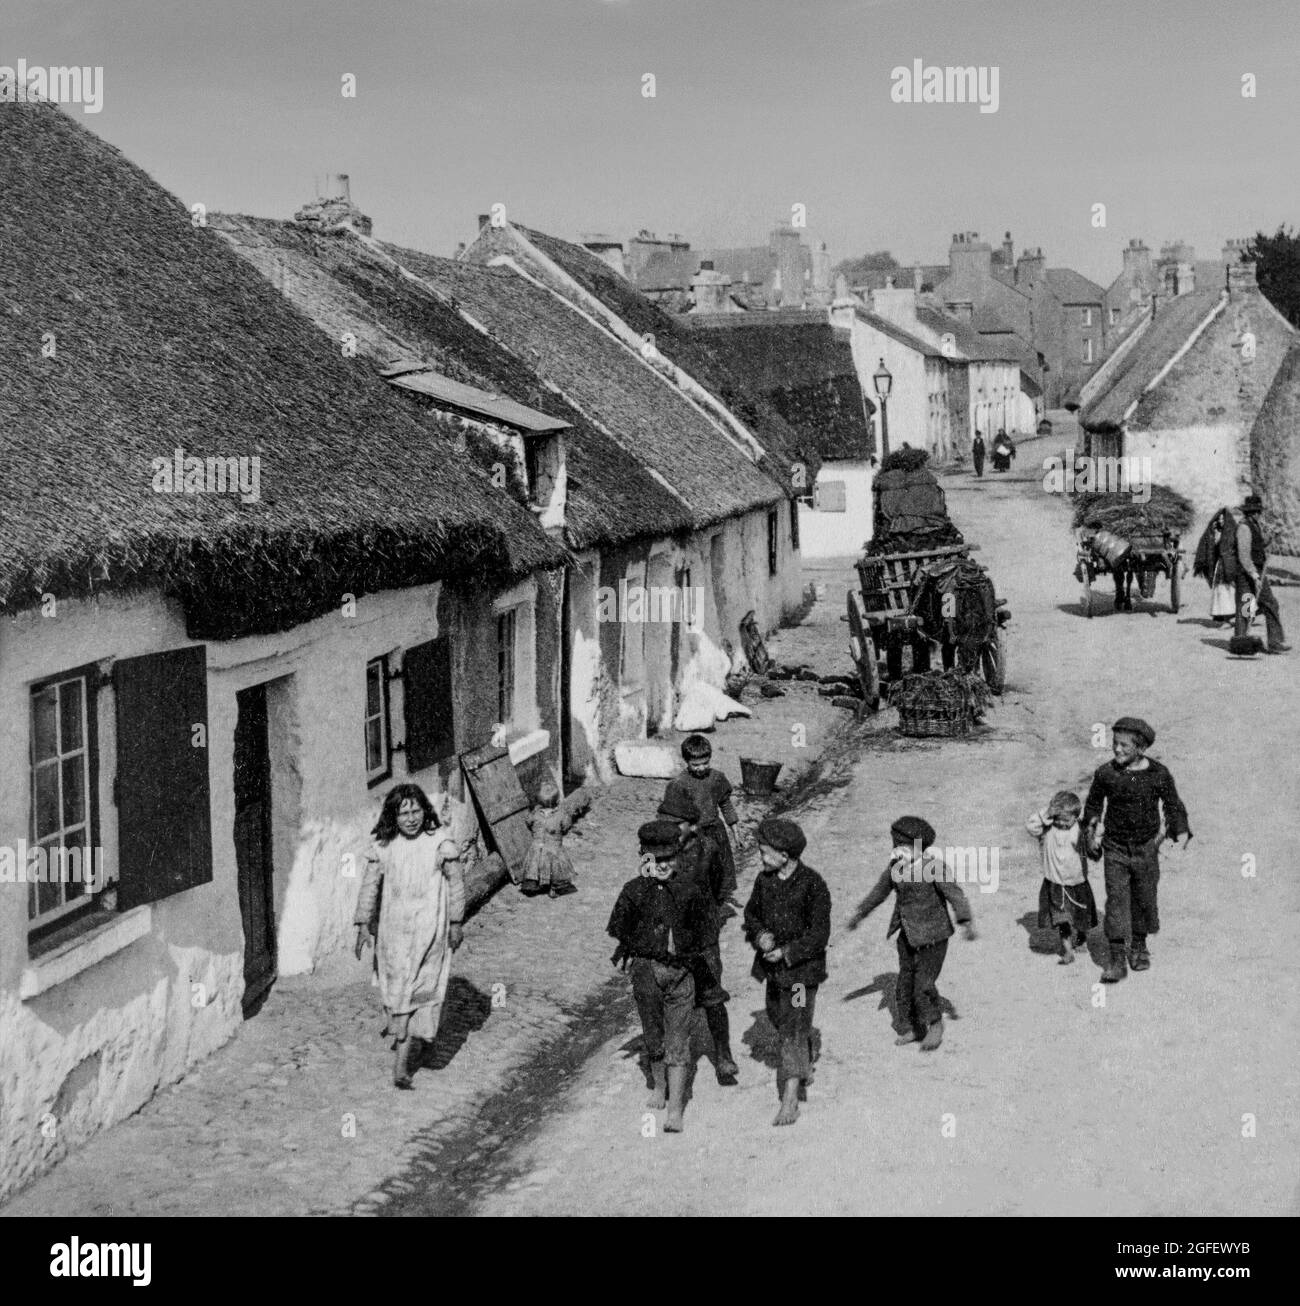 An early 20th century photograph of children in the Claddagh, formerly an Irish  fishing village, just outside the old city walls of Galway city, where the River Corrib meets Galway Bay.  During the 19th century the Claddagh attracted many visitors, but sadly the original village of thatched cottages was razed in the 1930s and replaced by council-housing. Stock Photo